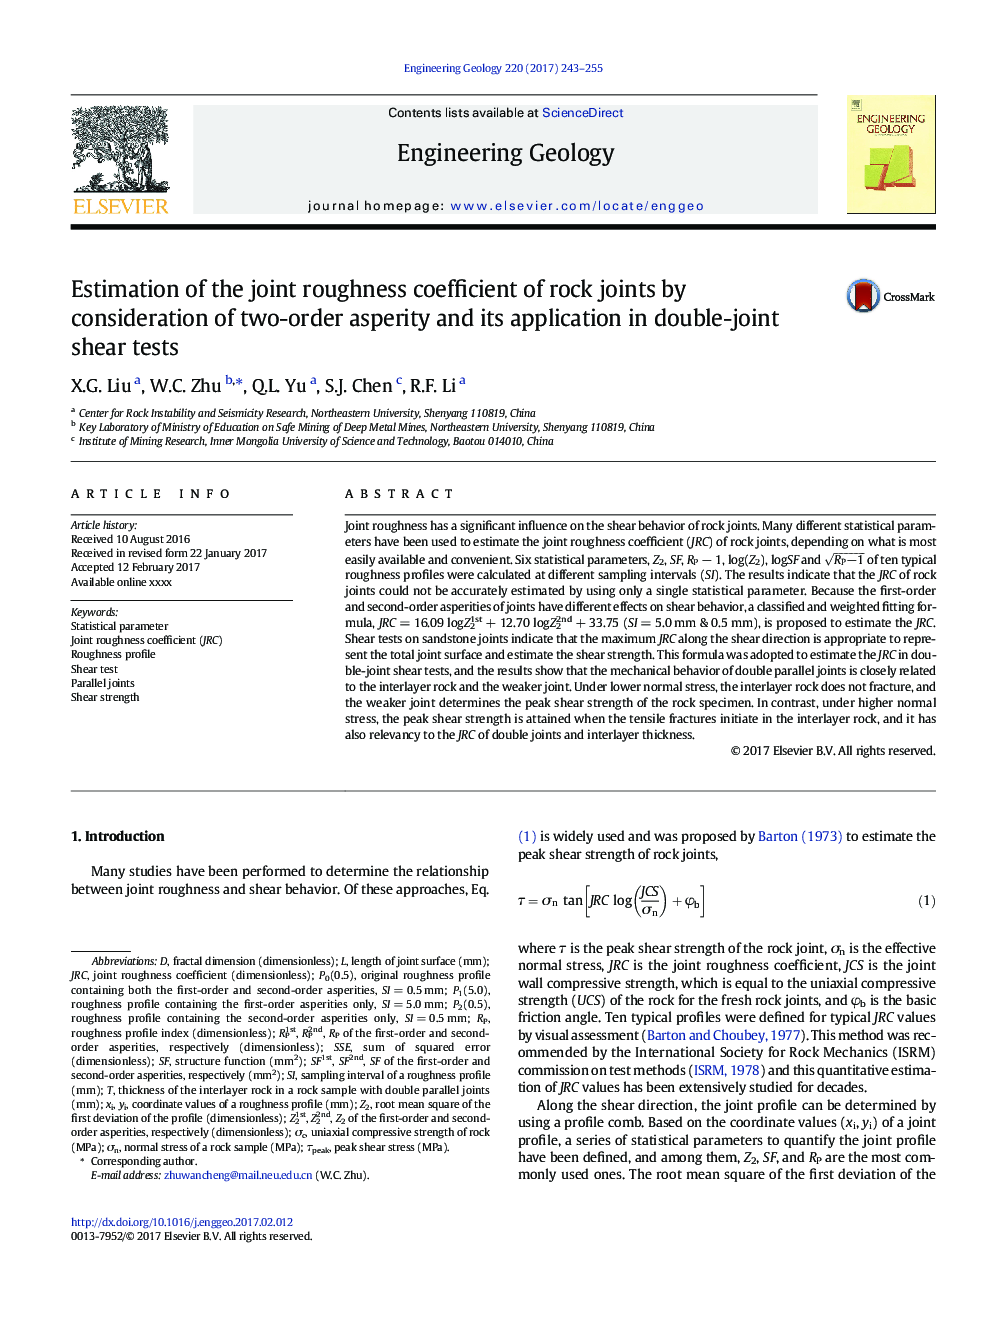 Estimation of the joint roughness coefficient of rock joints by consideration of two-order asperity and its application in double-joint shear tests